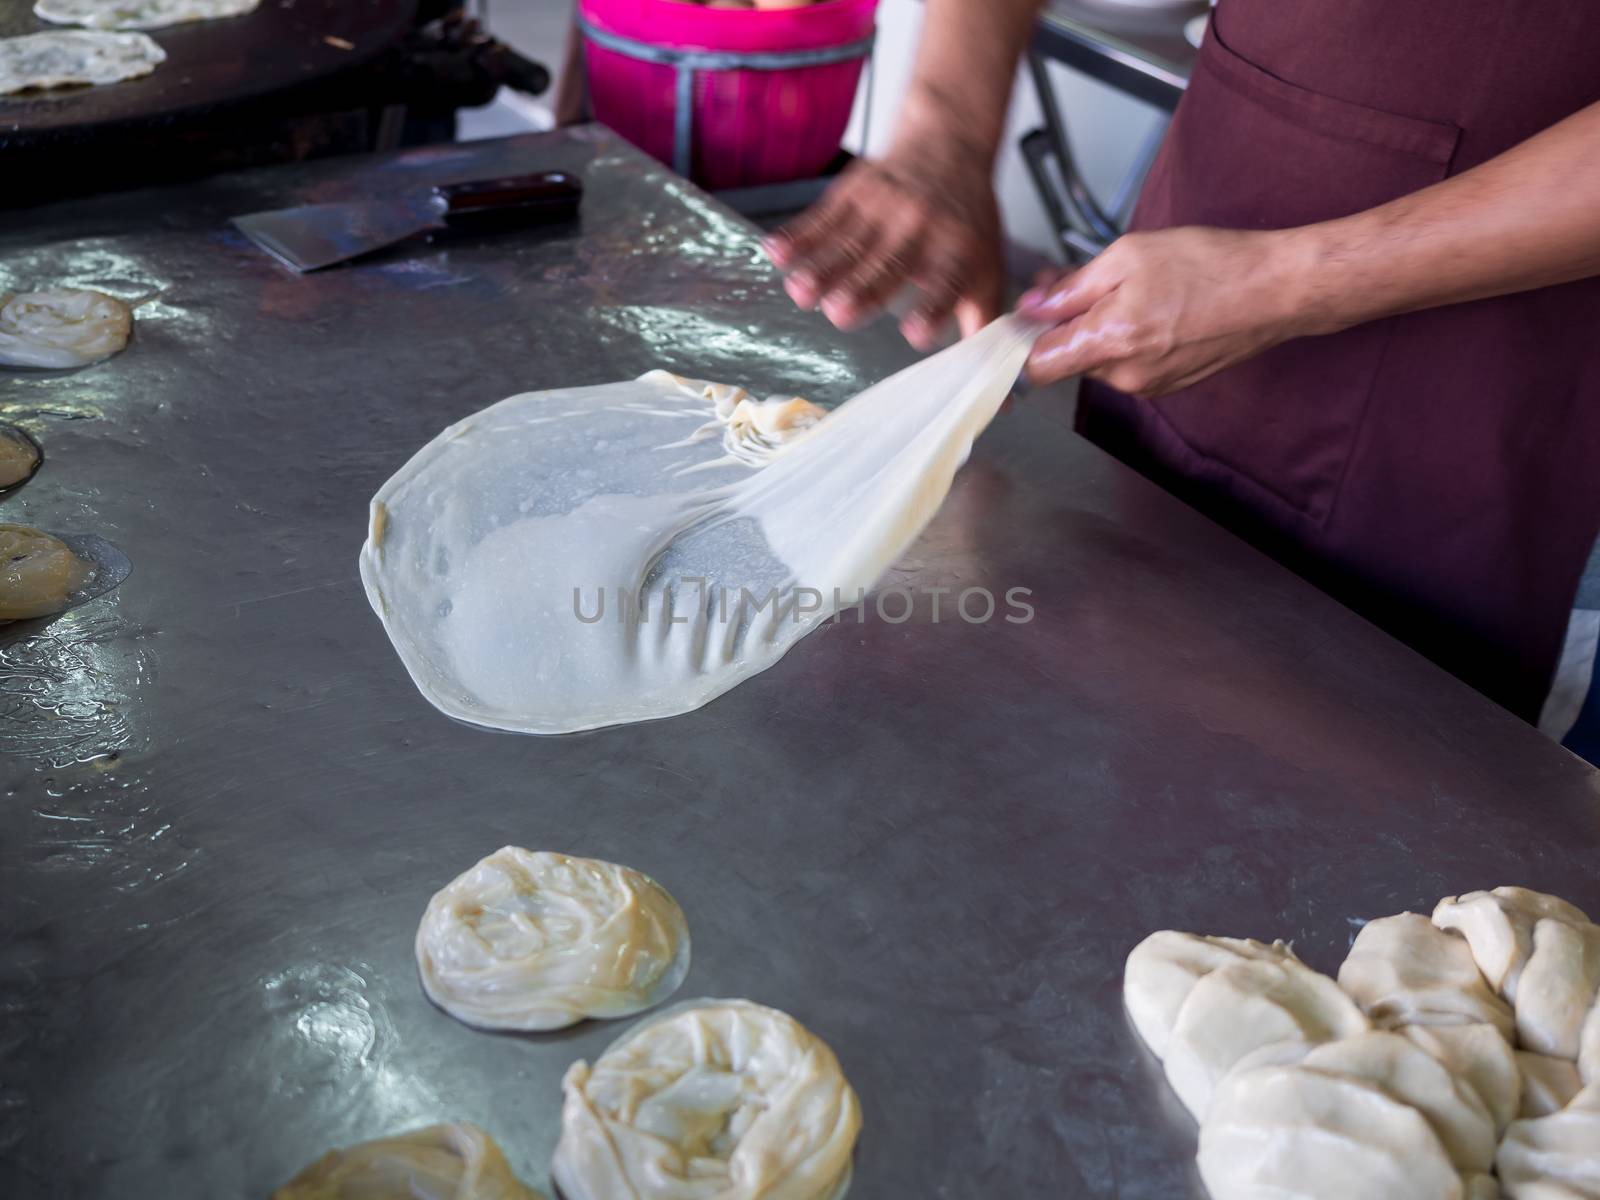 Roti Making, roti thresh flour by roti maker with oil. Indian tr by tete_escape